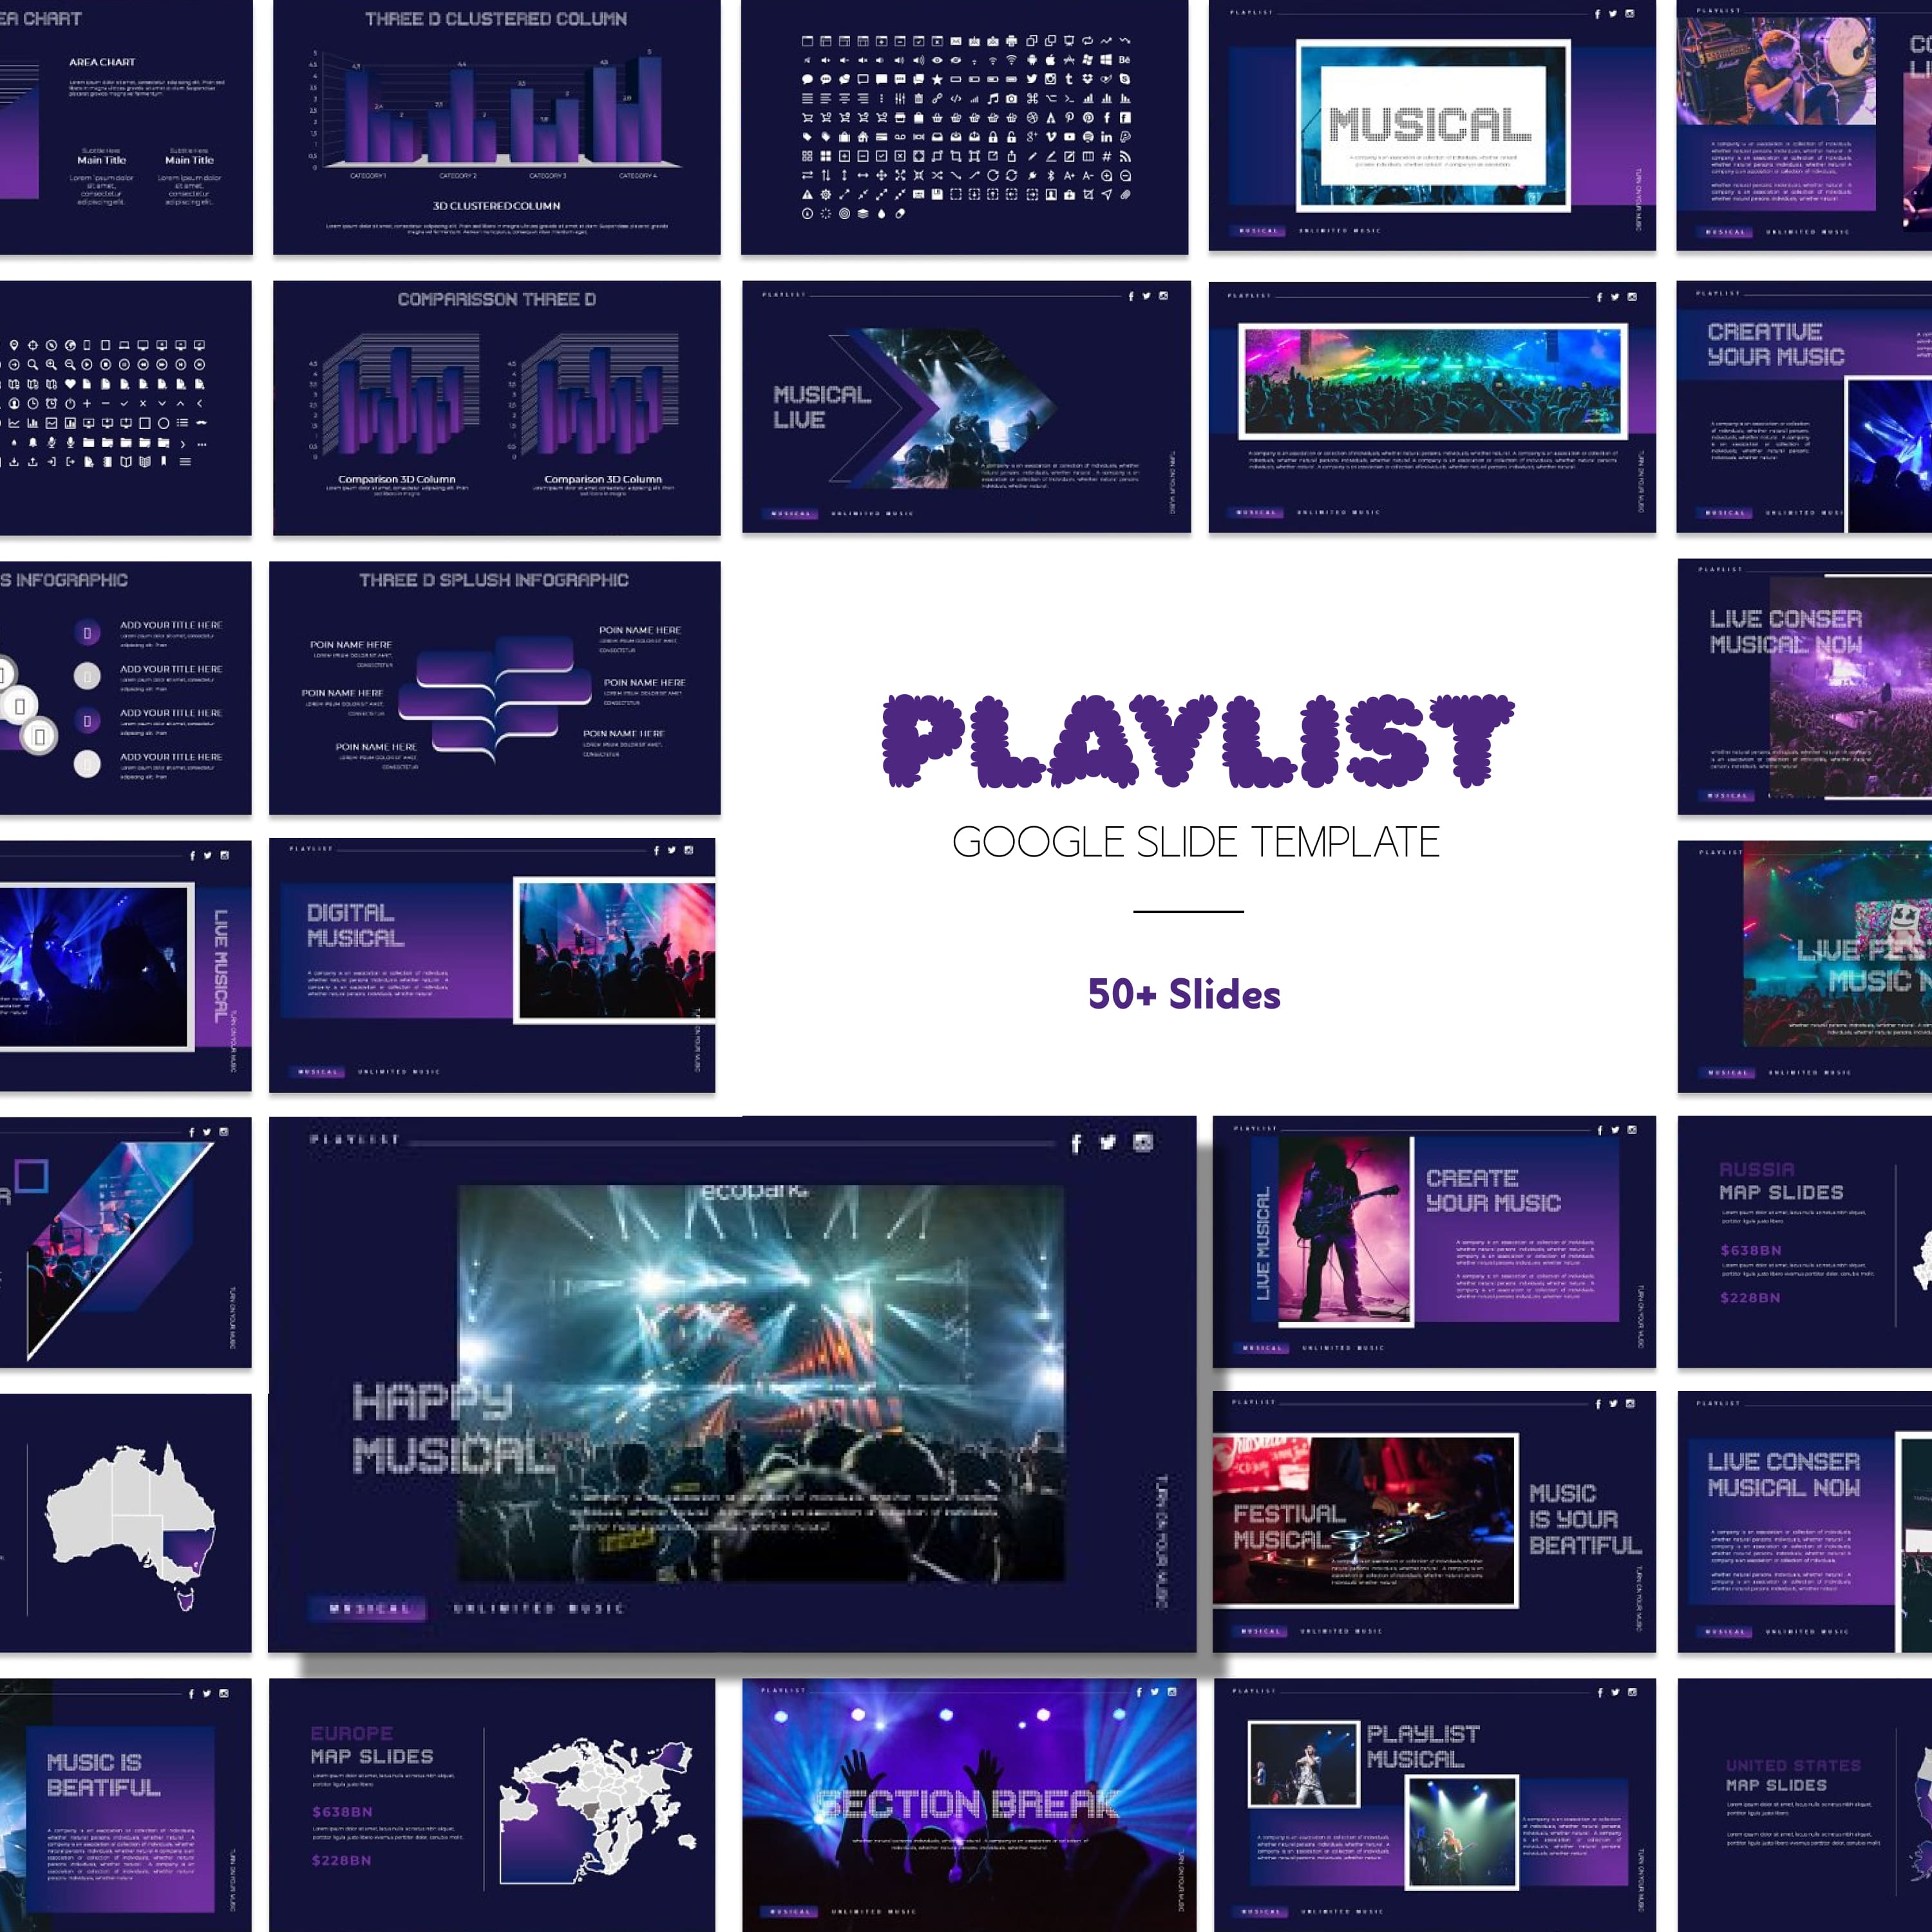 Playlist google slide template - main image preview.